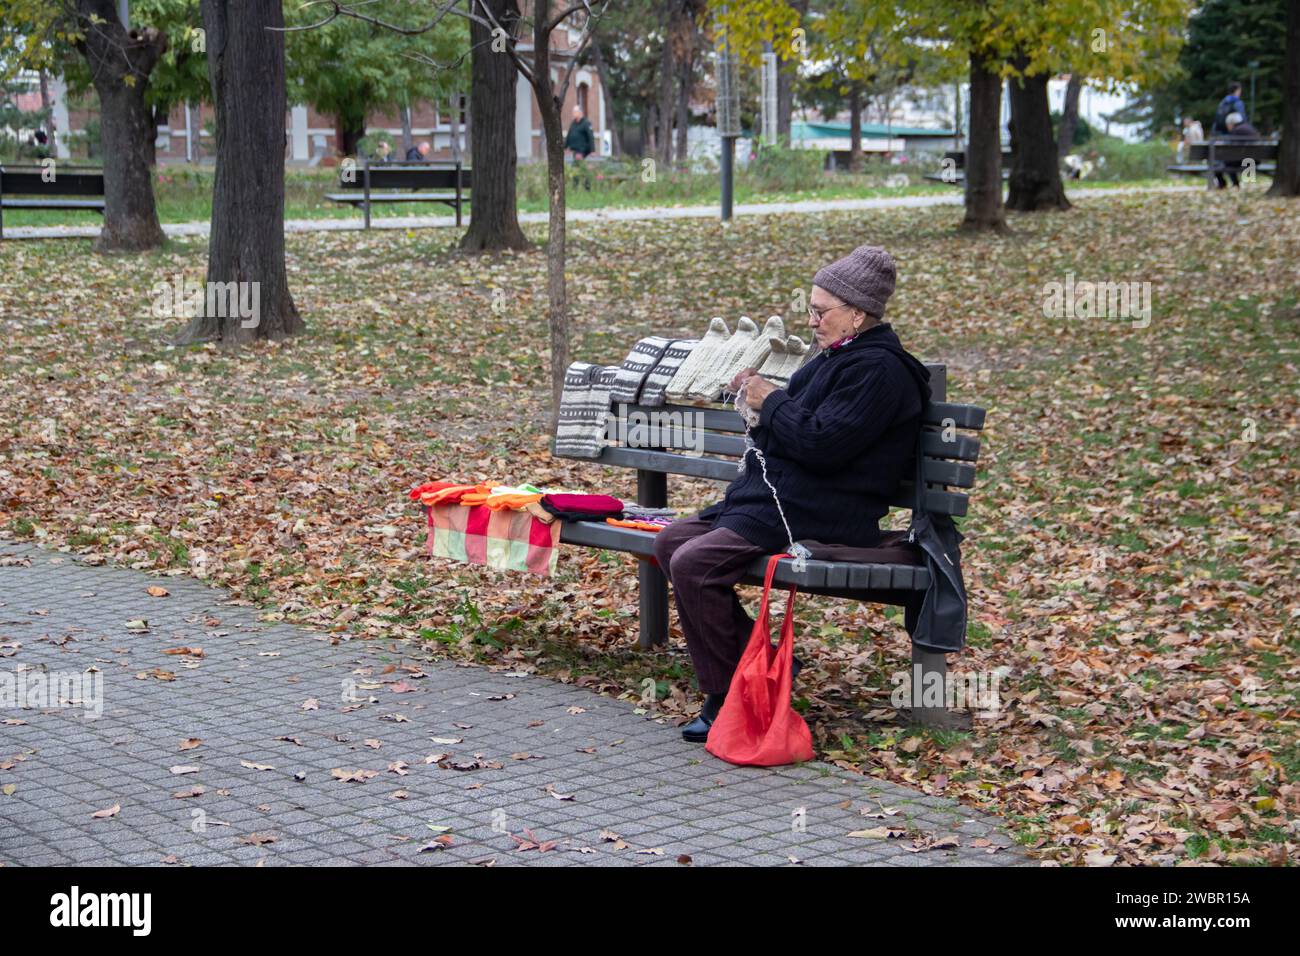 Elder woman relaxing in public city park by crocheting and making woolen pieces of wardrobe for sale, nice retirement hobby at the fresh air outdoors Stock Photo